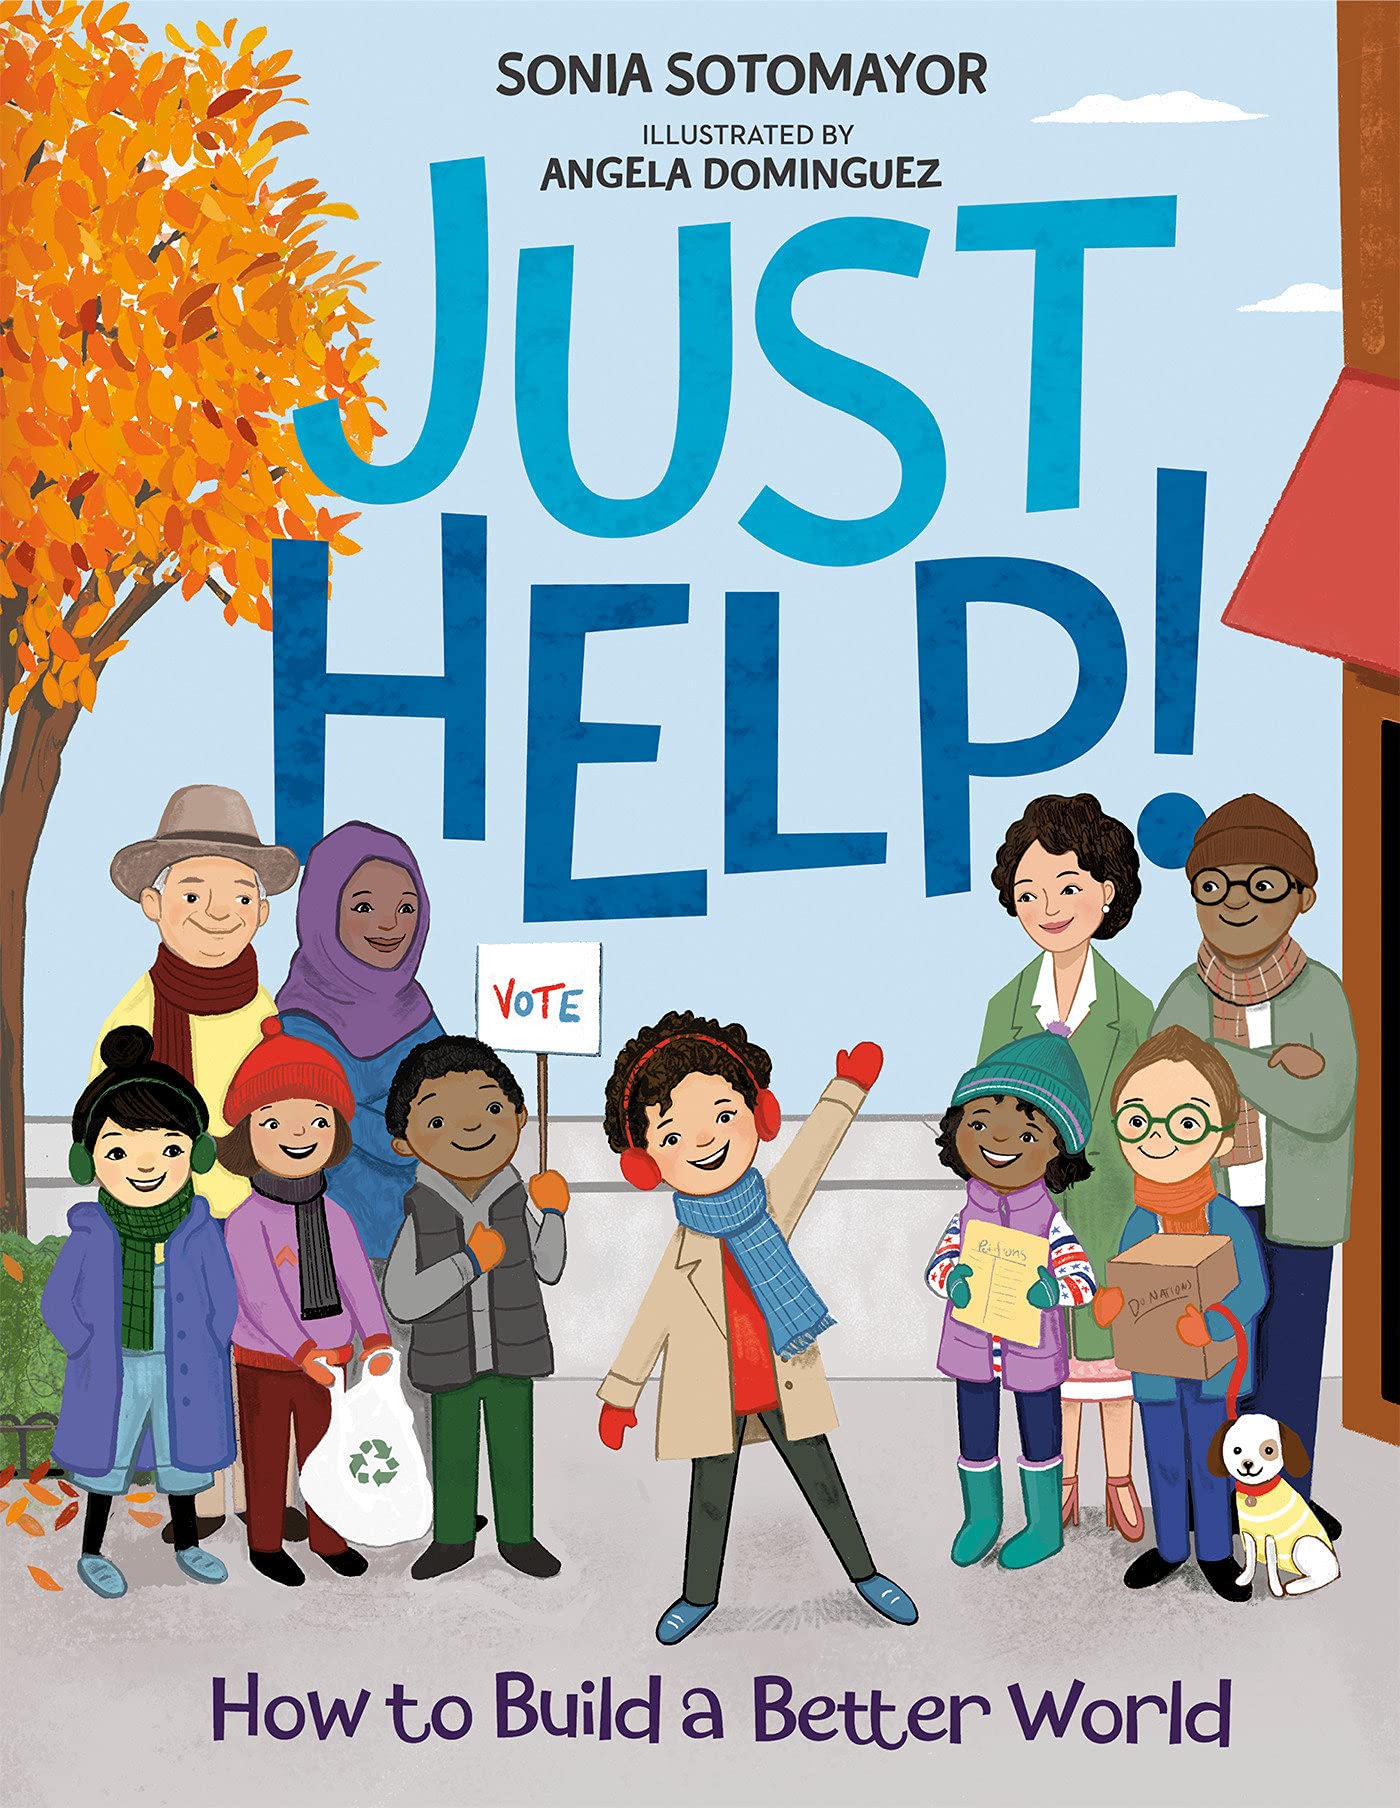 Image for "Just Help!"